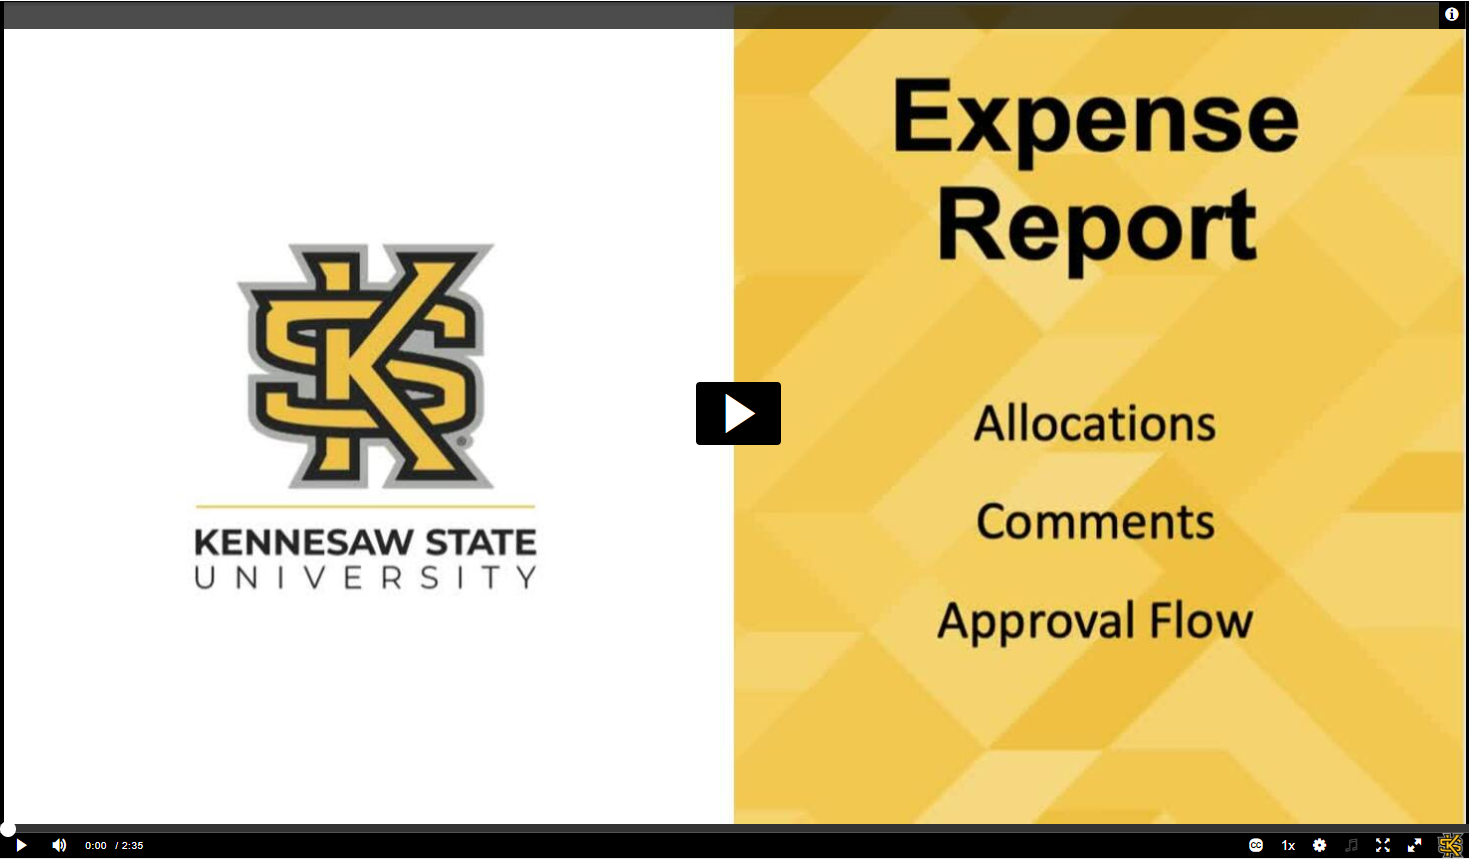 Expense Report: Allocation, Comment, Approval Flow Video